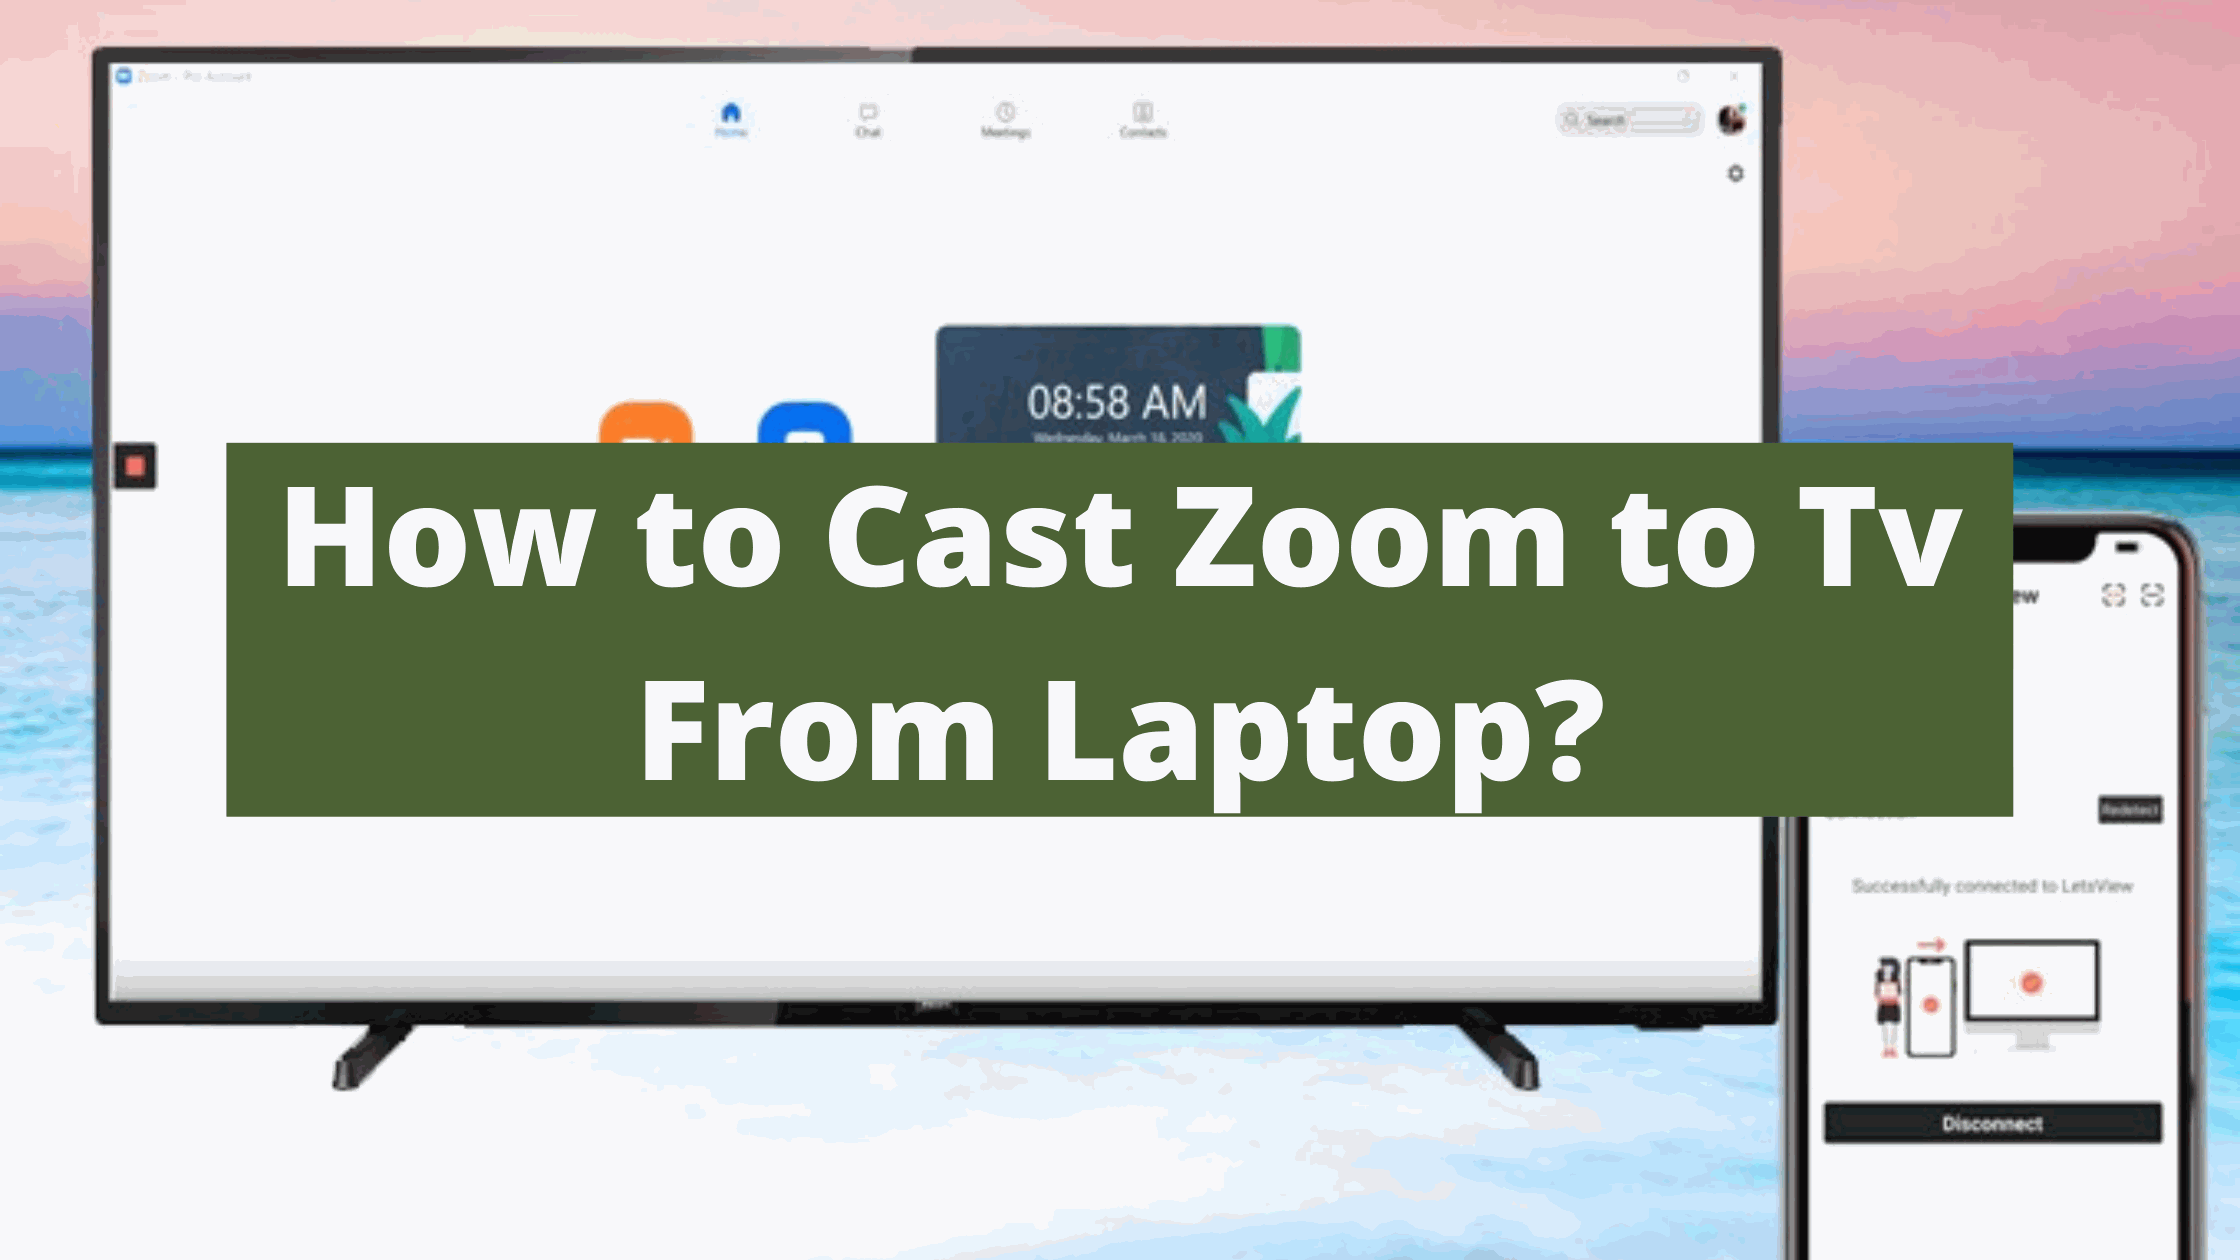 How to Cast Zoom to Tv From Laptop?